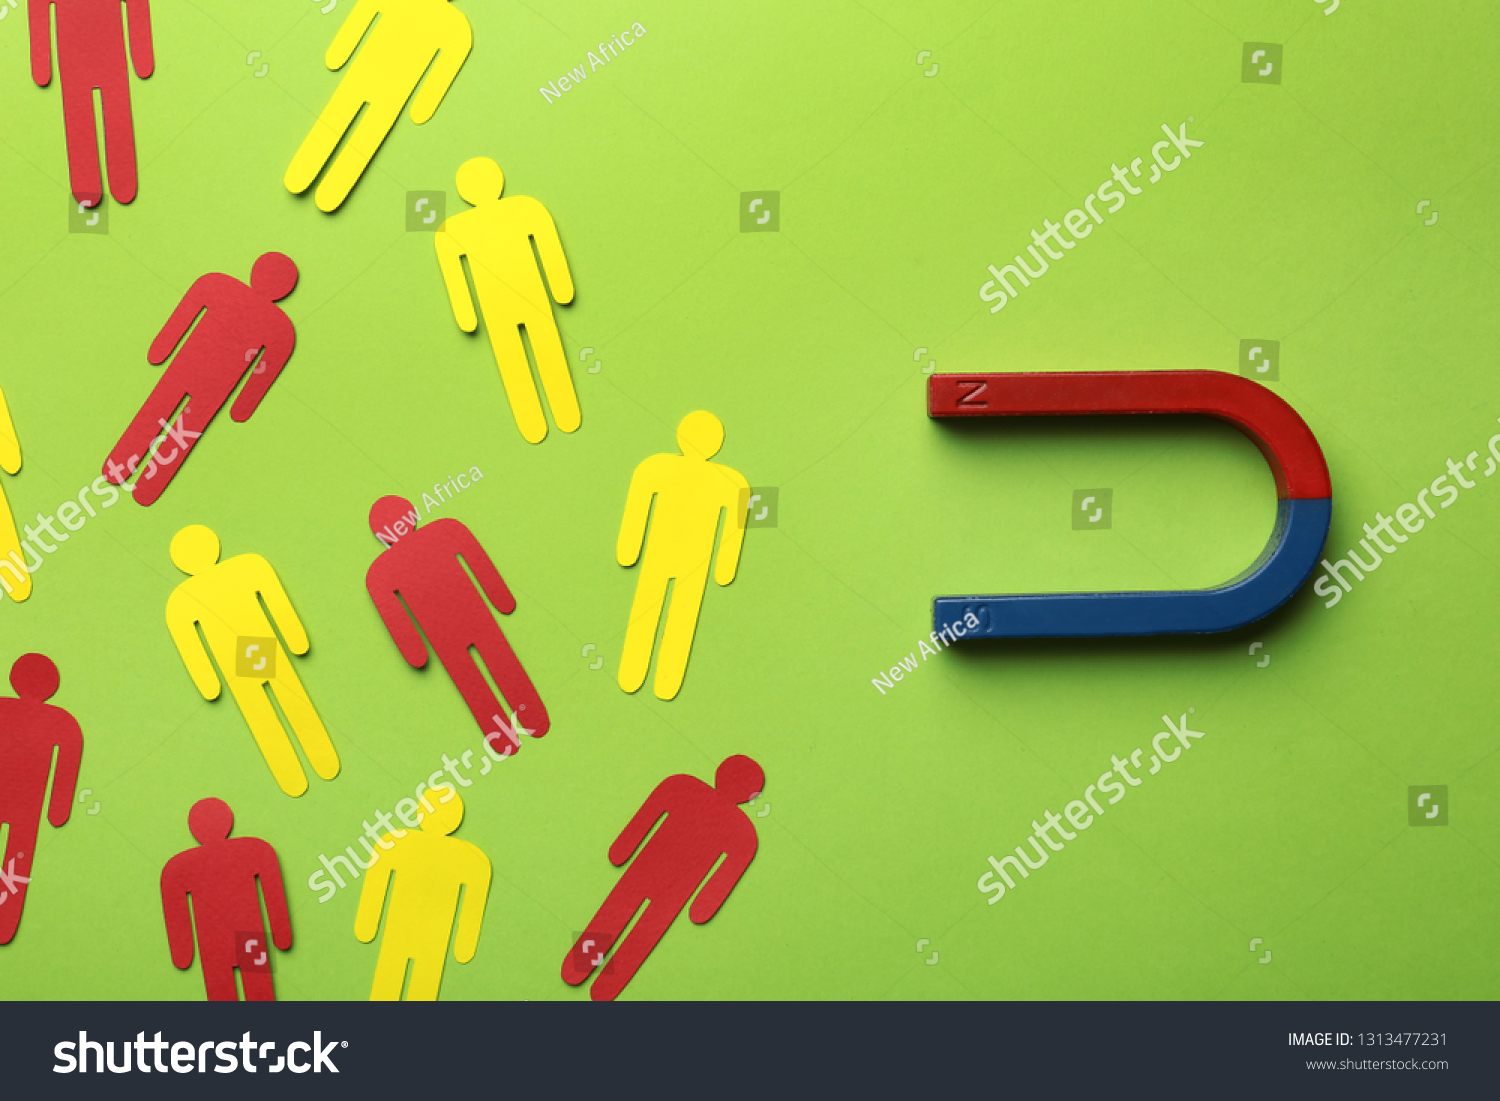 Magnet attracting paper people on color background, flat lay. Marketing concept #1313477231